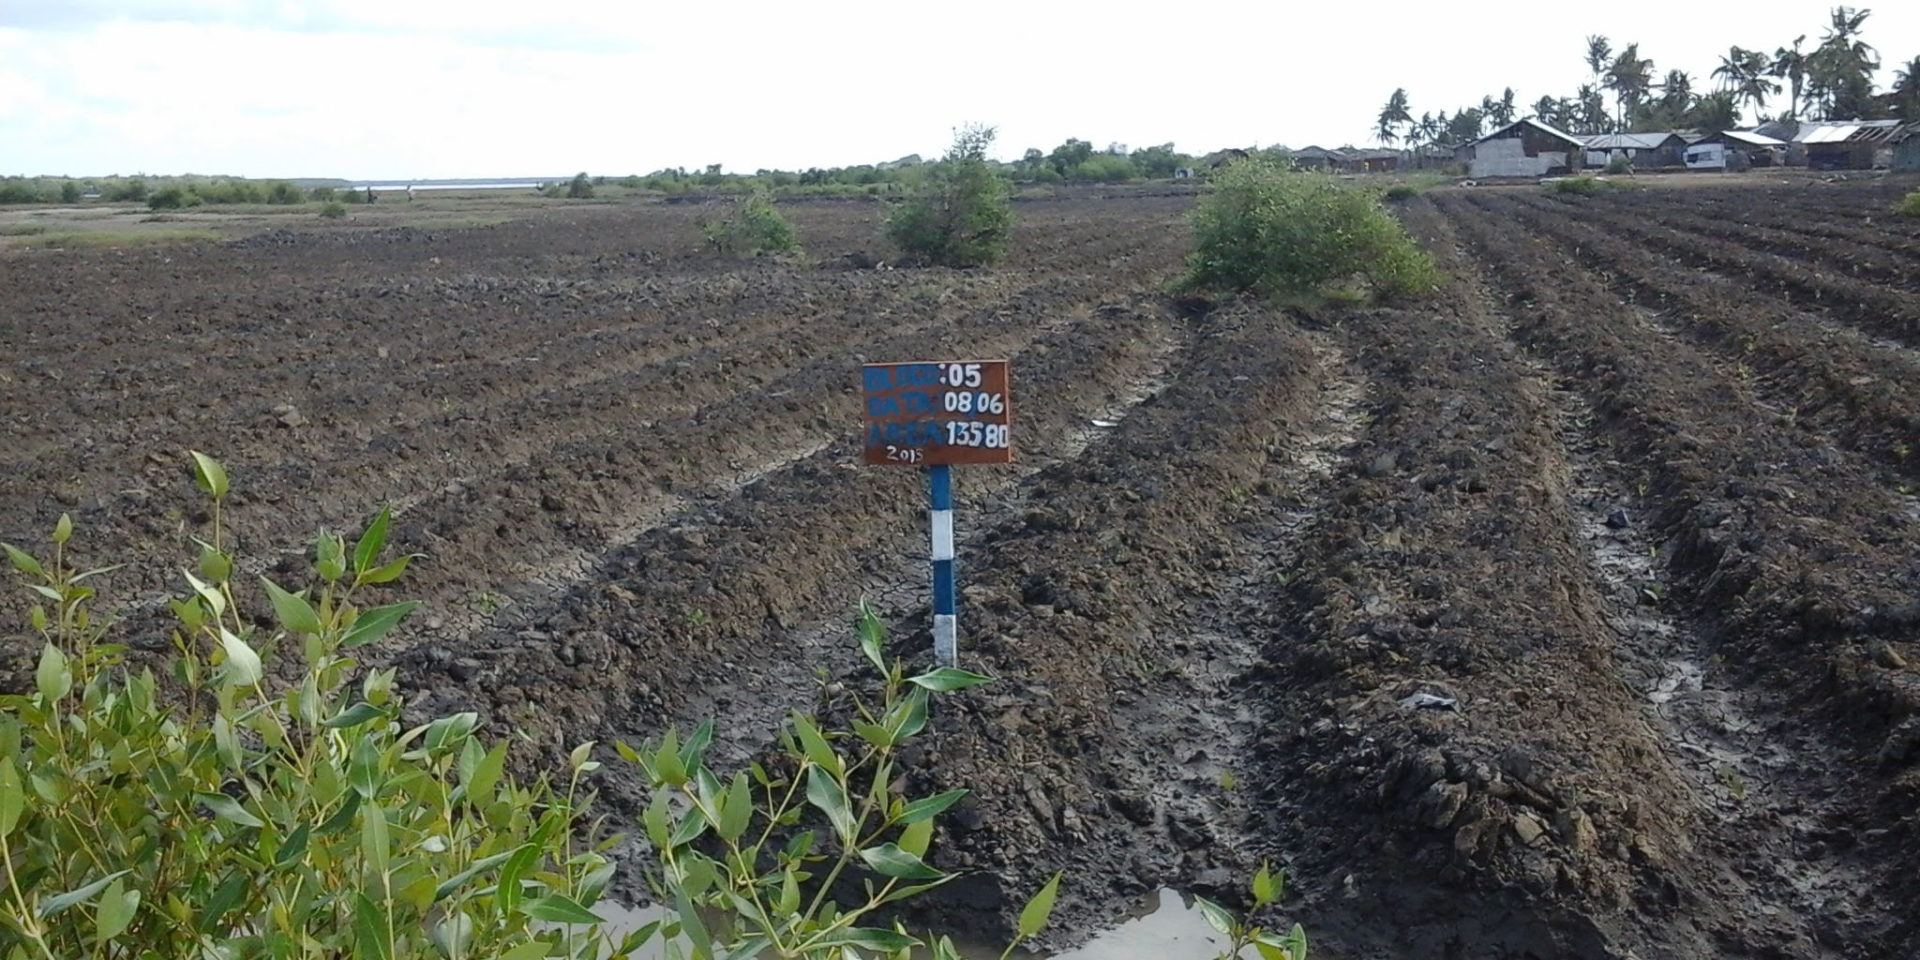 Image of freshly-tilled farmland with a blue and white marking post in the foreground.